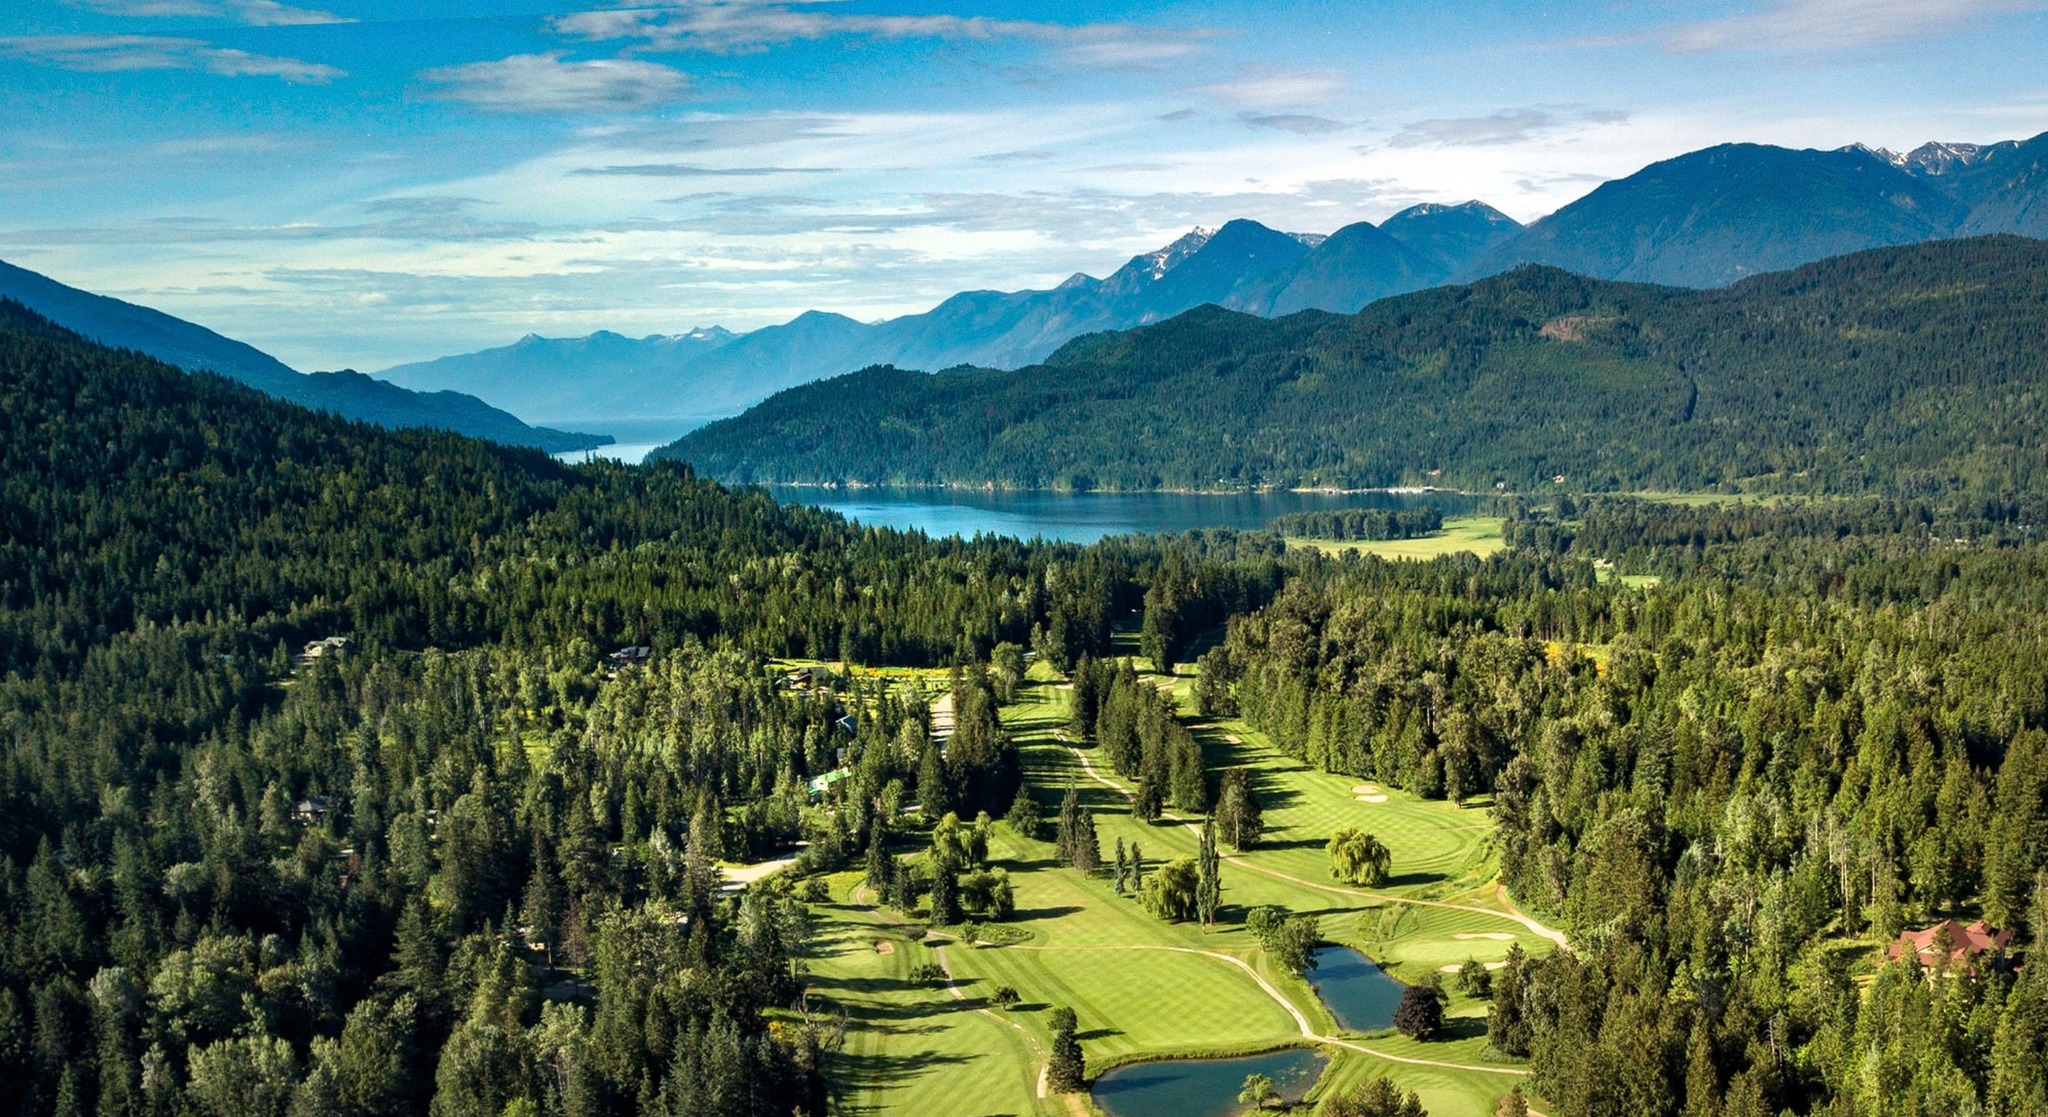 Aerial view of the Kokanee Springs Resort, showing fairway and greens set amongst trees, lake and mountains in far distance. 